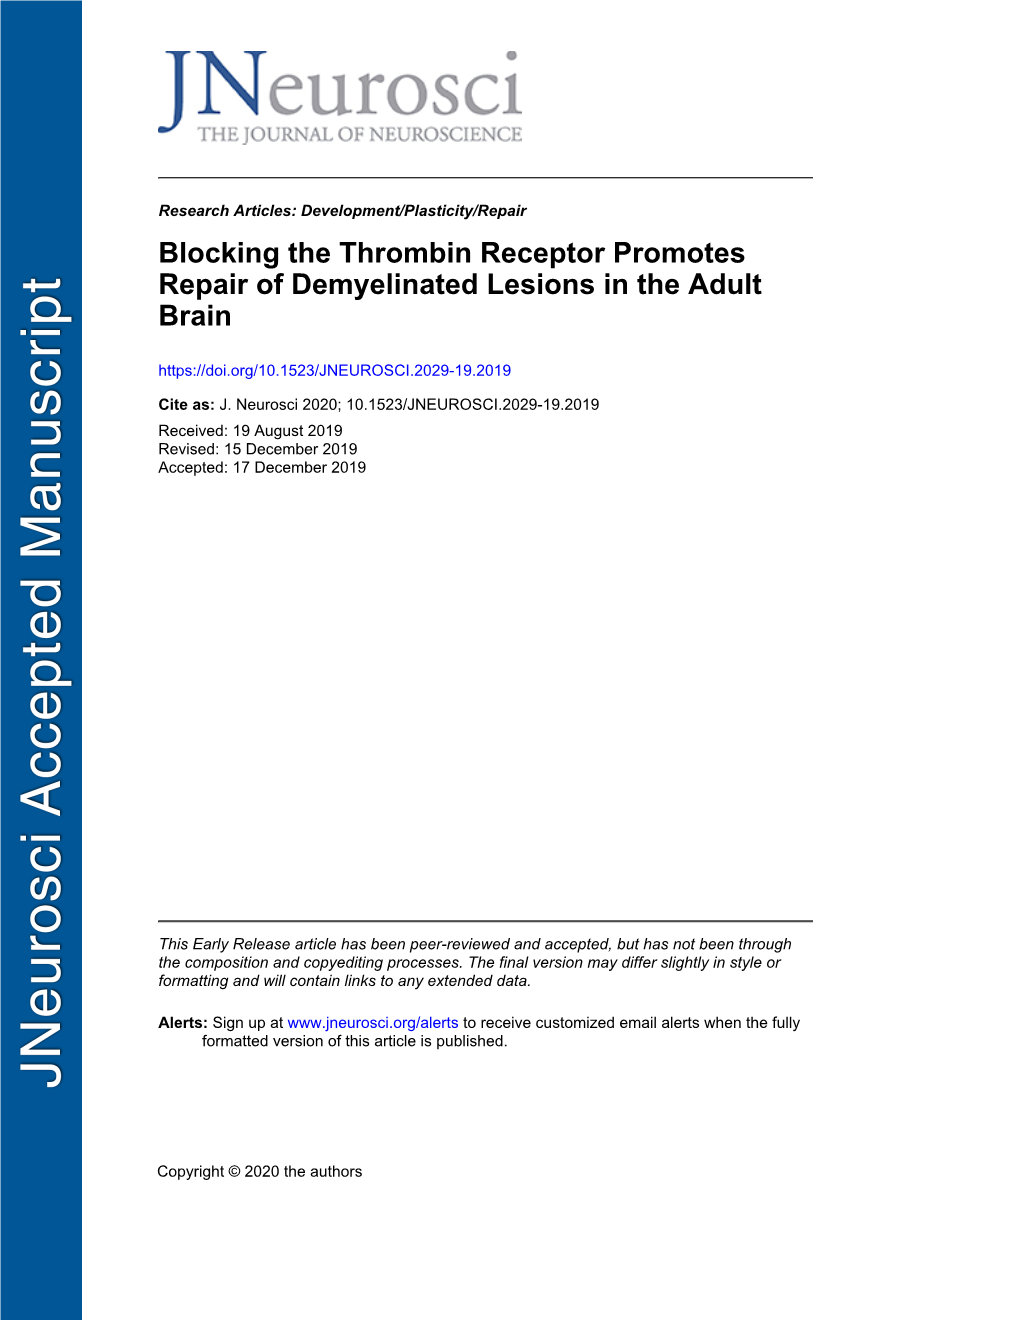 Blocking the Thrombin Receptor Promotes Repair of Demyelinated Lesions in the Adult Brain